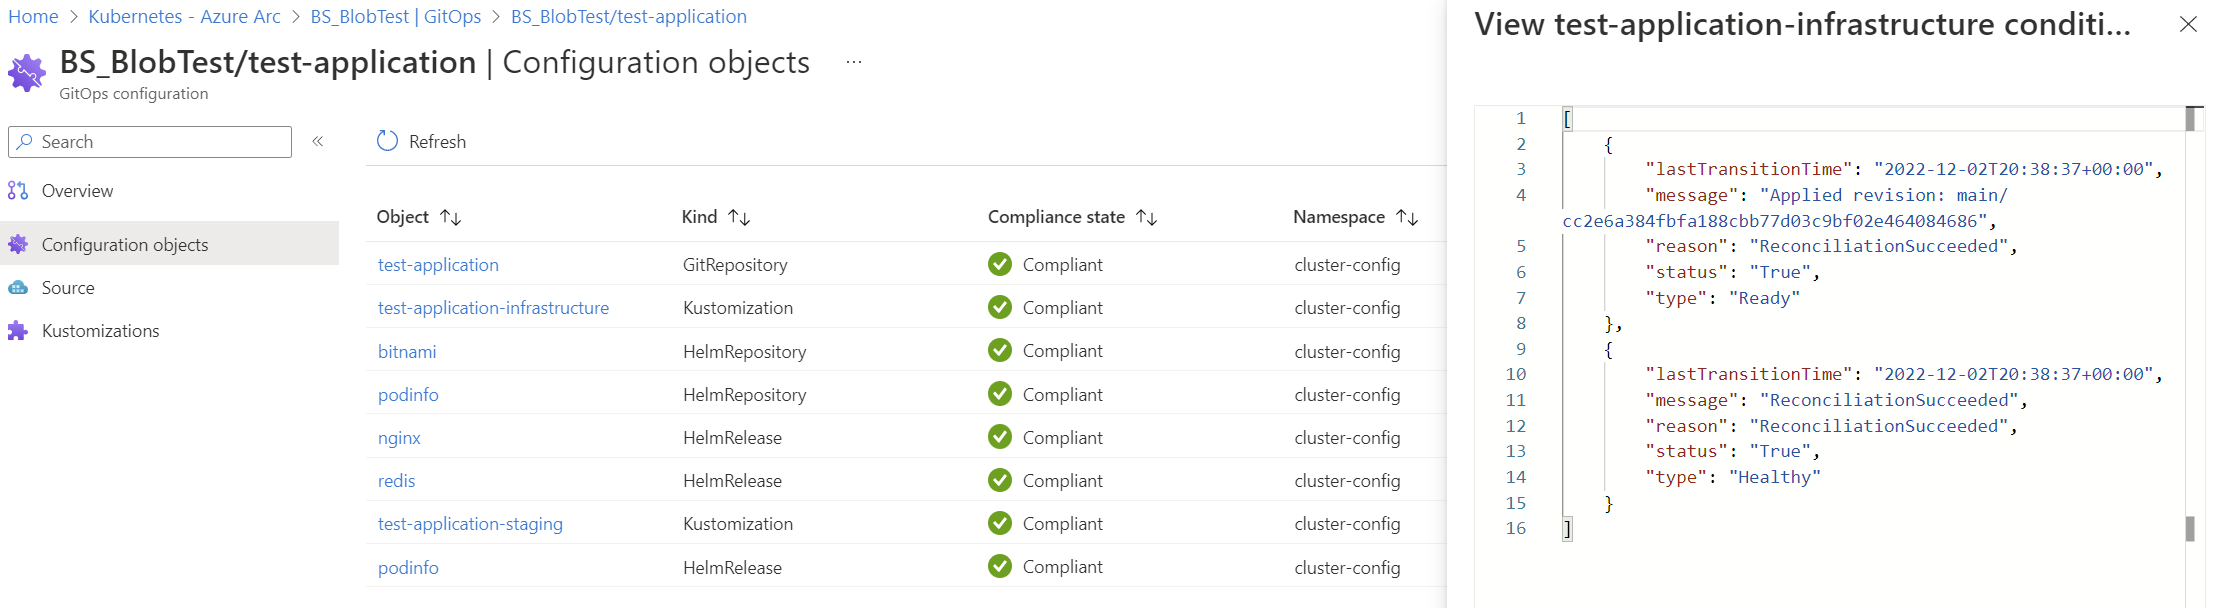 Screenshot showing condition details for a configuration object in the Azure portal.